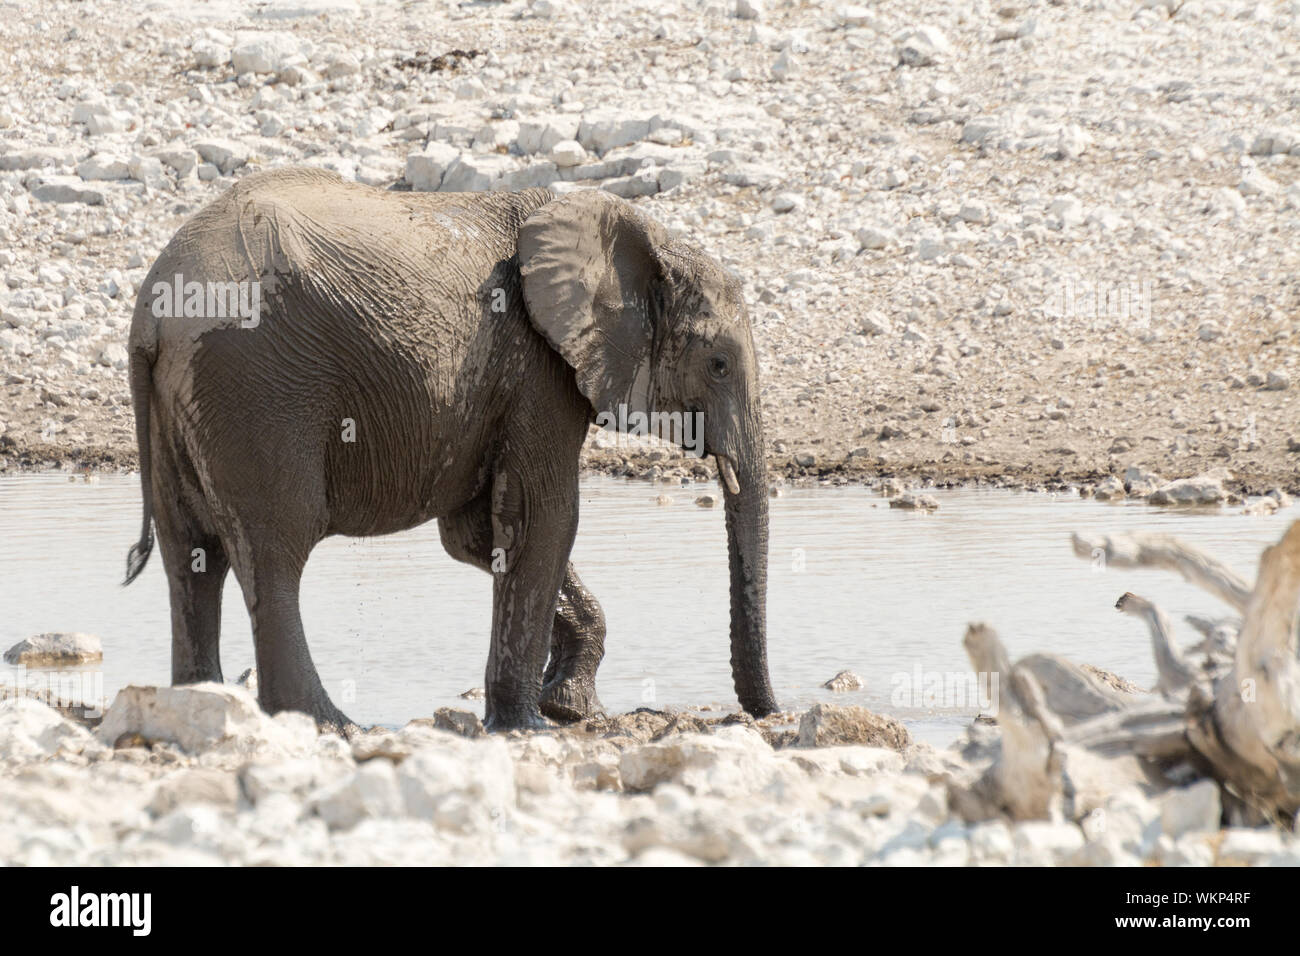 View Of Elephant At Watering Hole Stock Photo